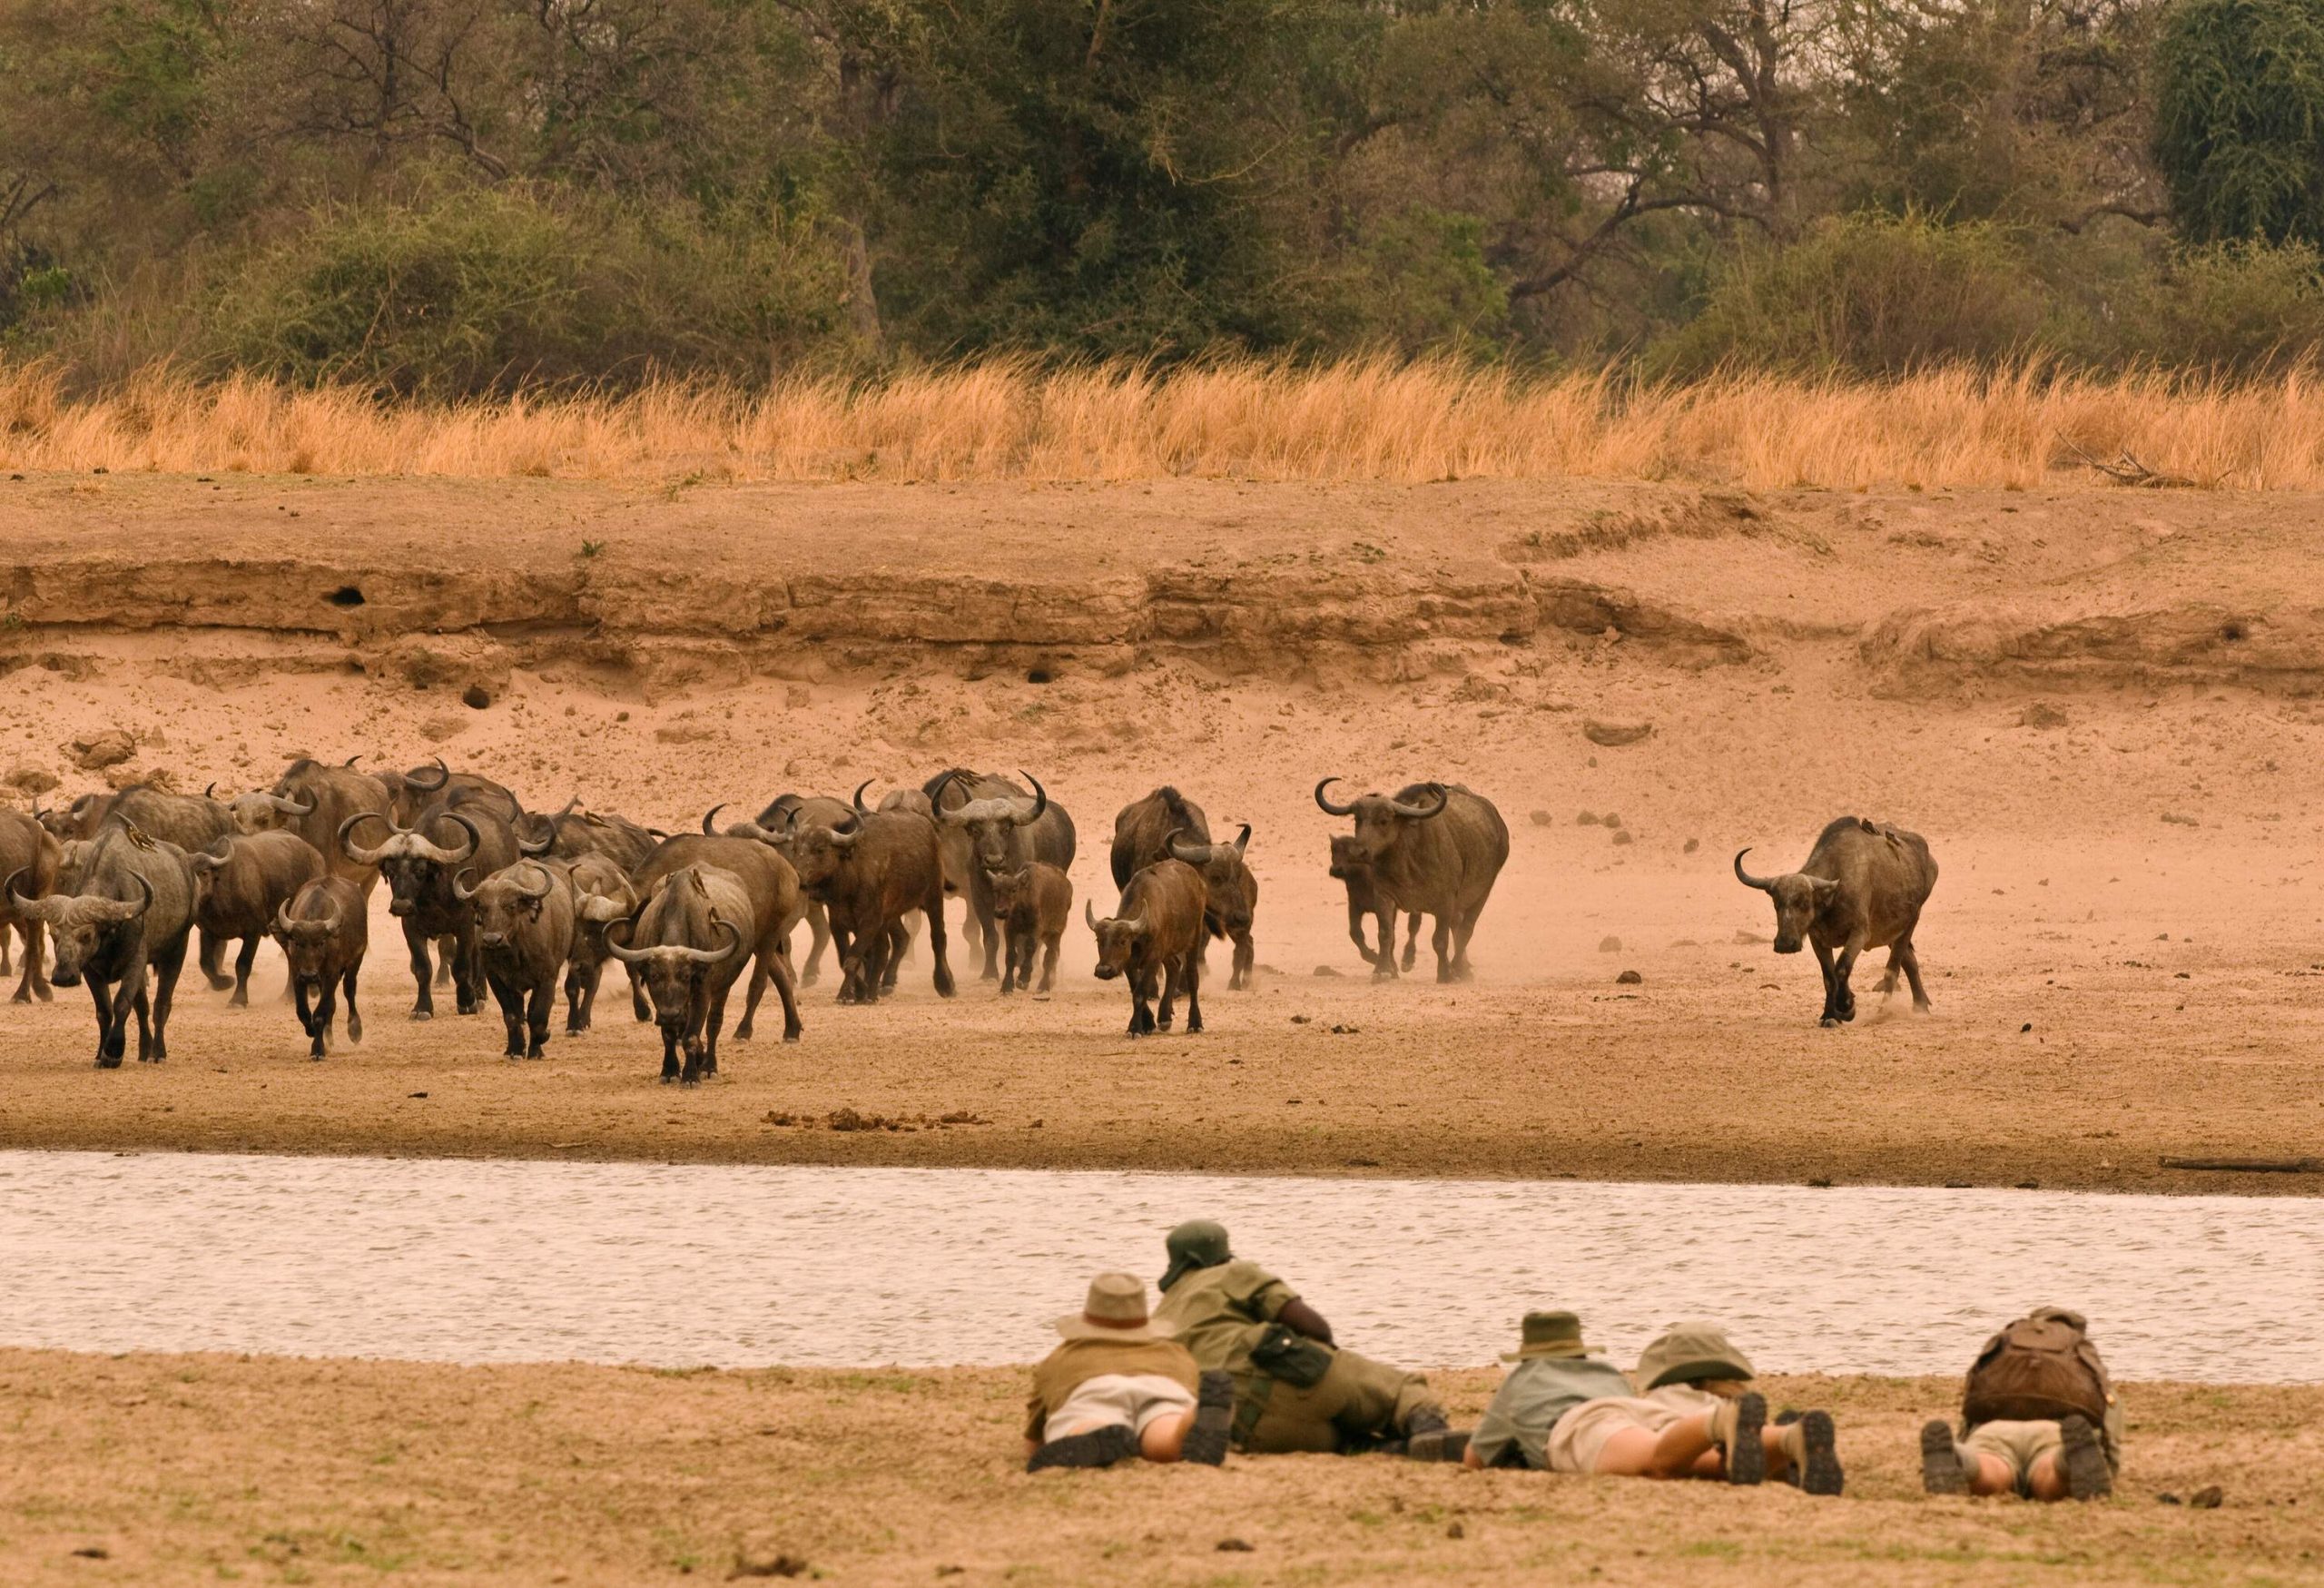 Four people are lying on their bellies on the opposite side, watching, as a herd of buffalo makes its way to a creek in a natural setting.